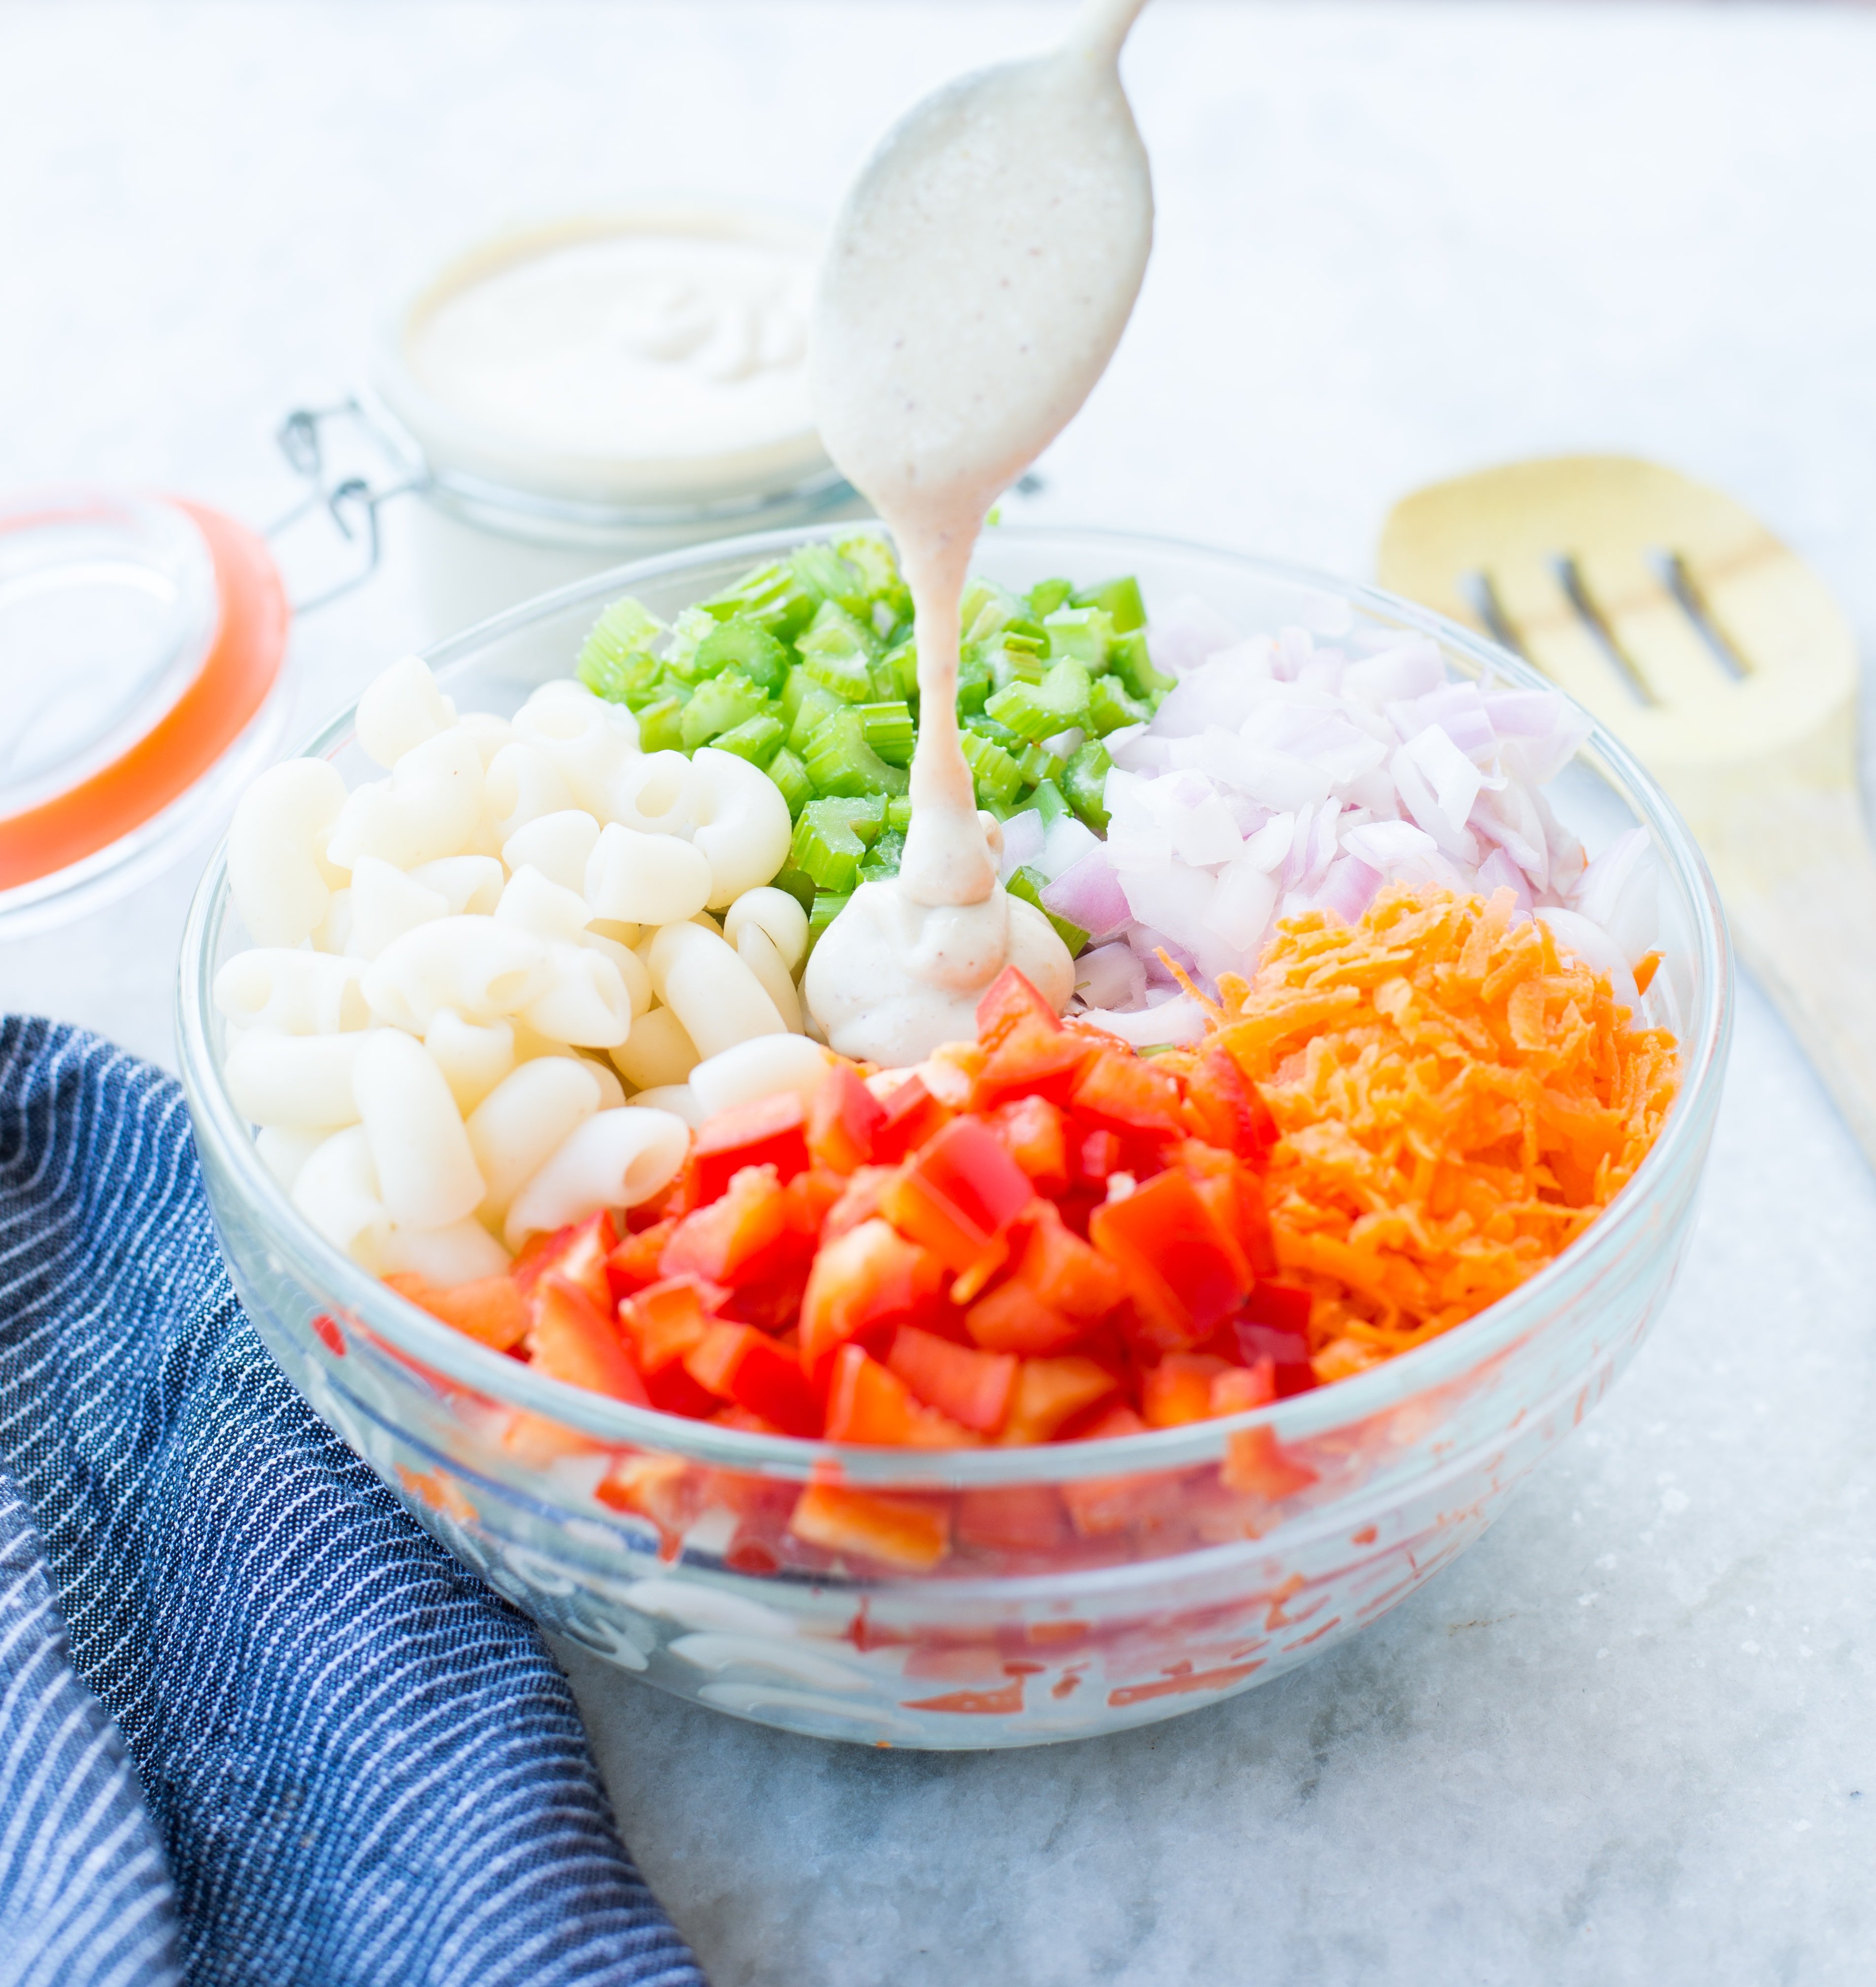 Delicious Vegan Macaroni Salad is a perfect side for Picnic, potluck or Barbecue. This Vegan Pasta salad is creamy with crisp vegetables and a light Tahini Cashew Dressing.